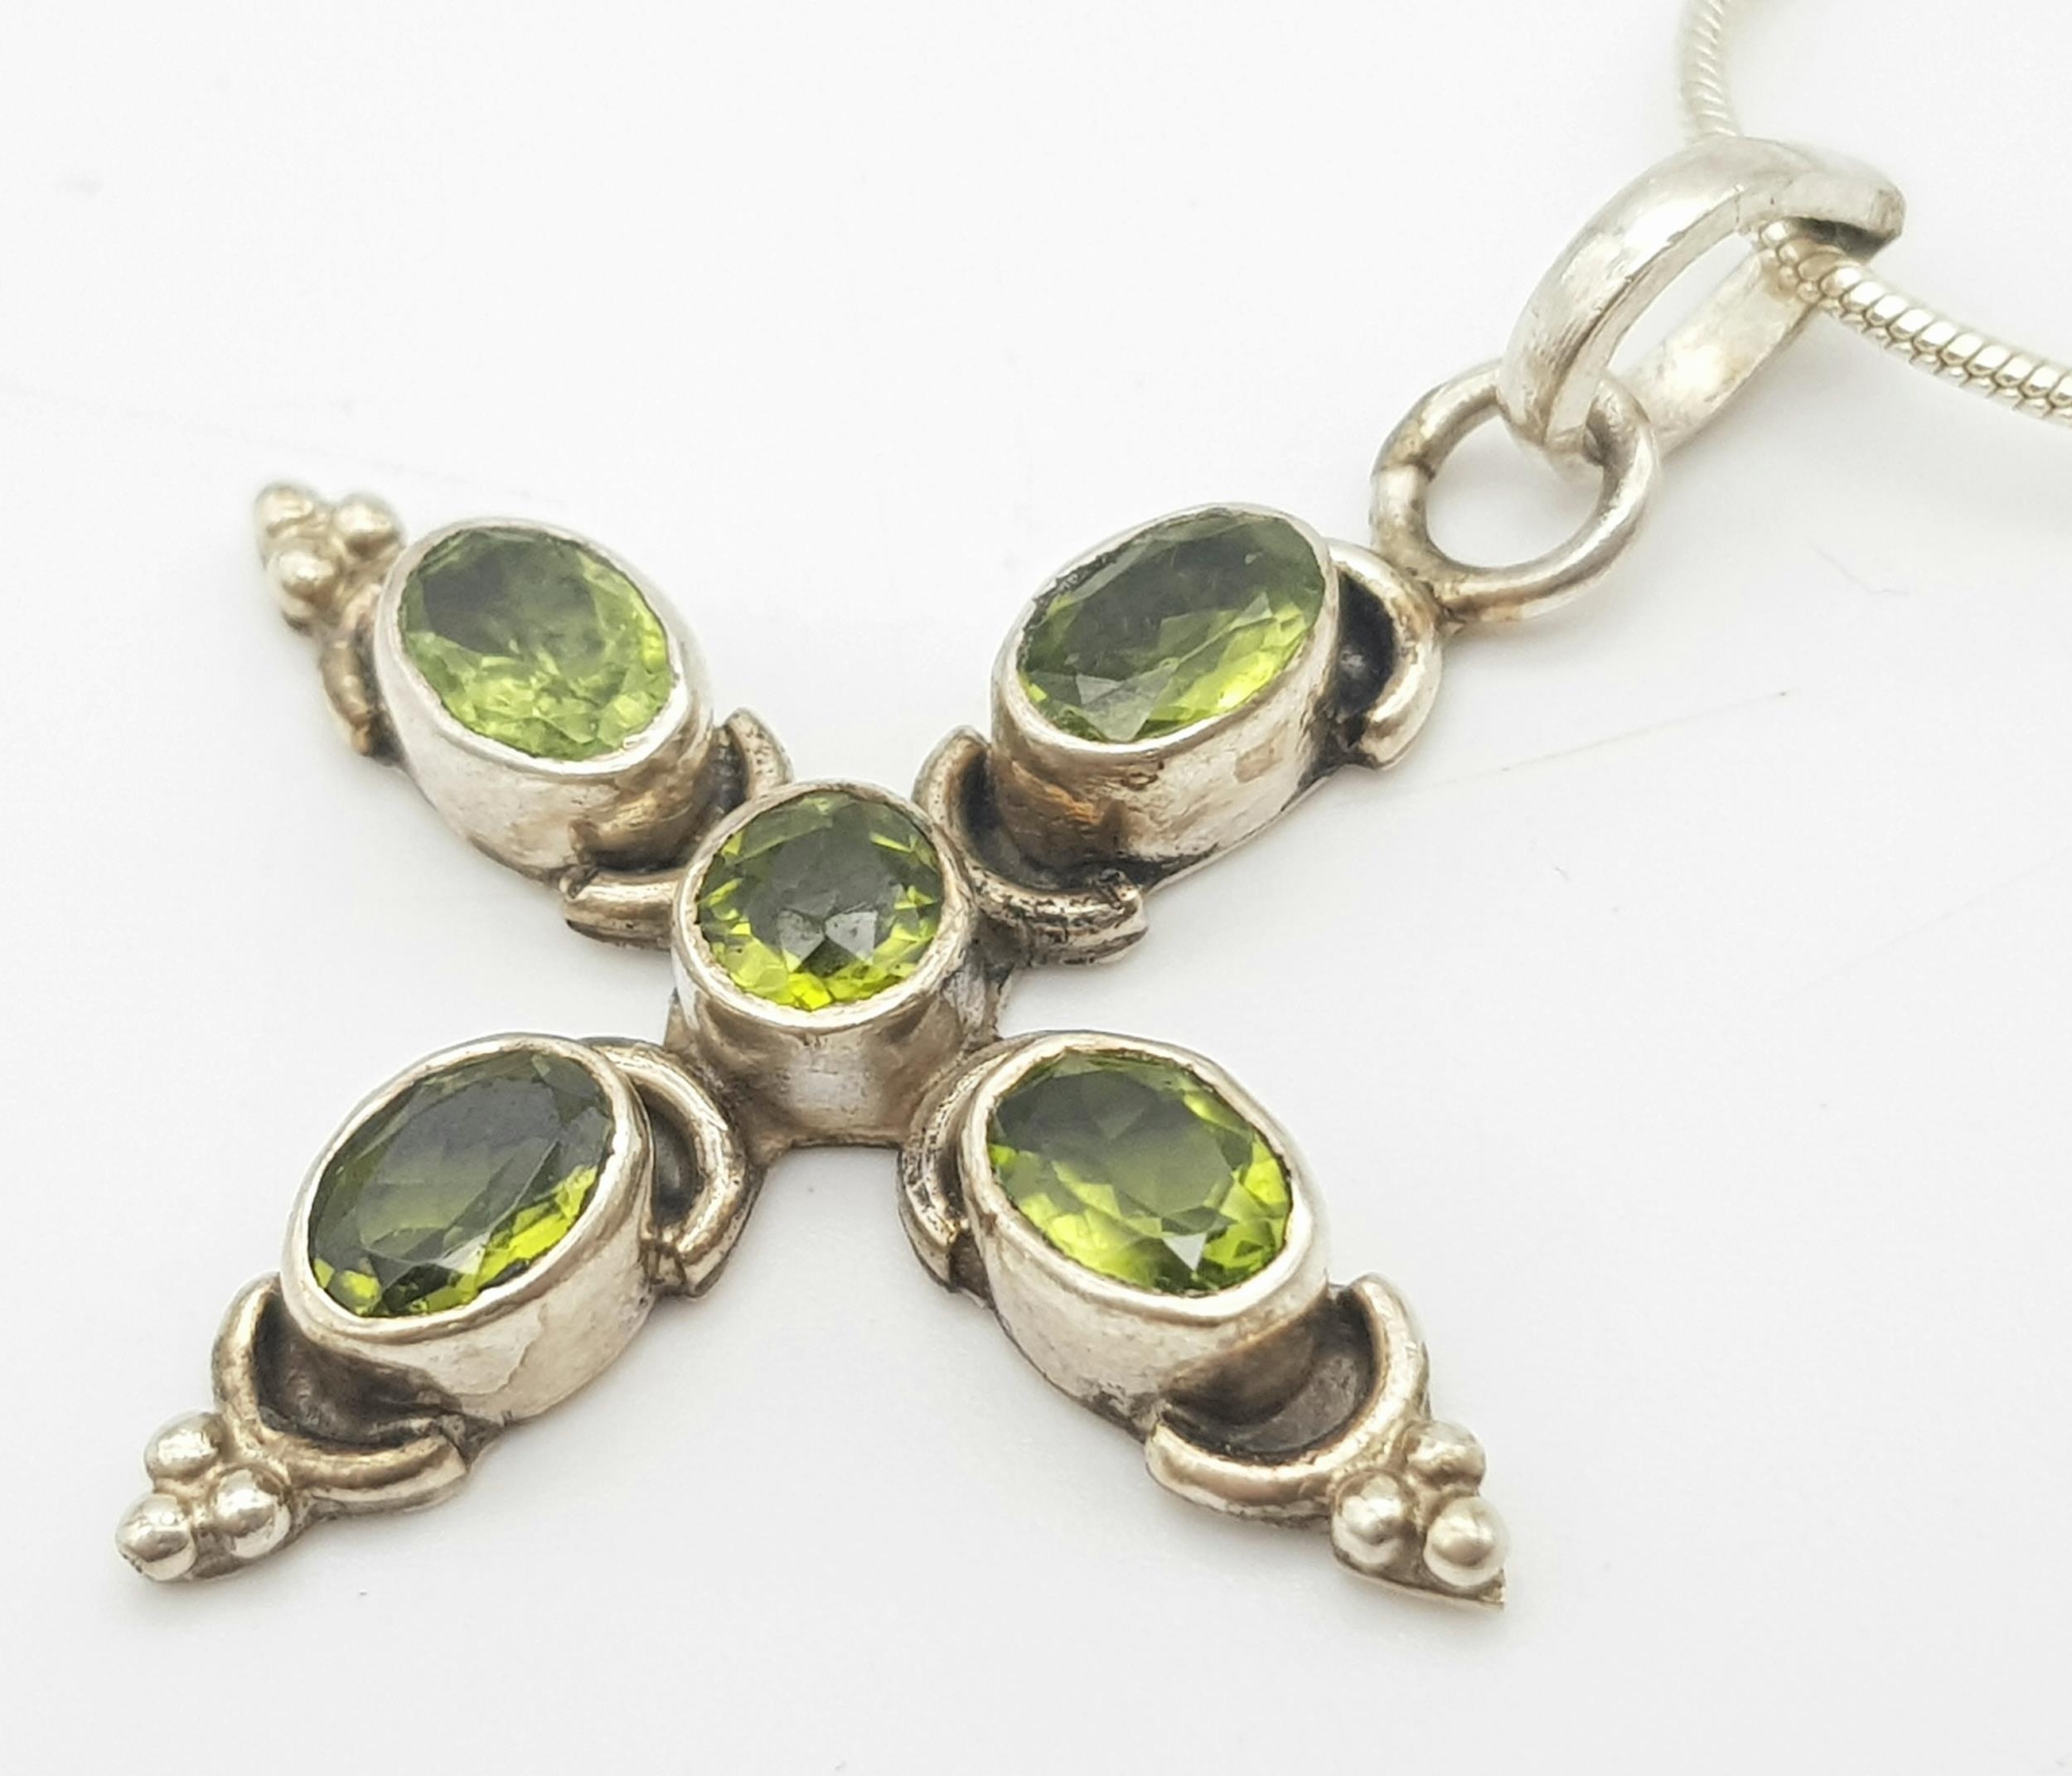 A Vintage Sterling Silver Peridot Set Cross Necklace. 46cm Sterling Silver Rope Chain. Pendant - Image 2 of 5